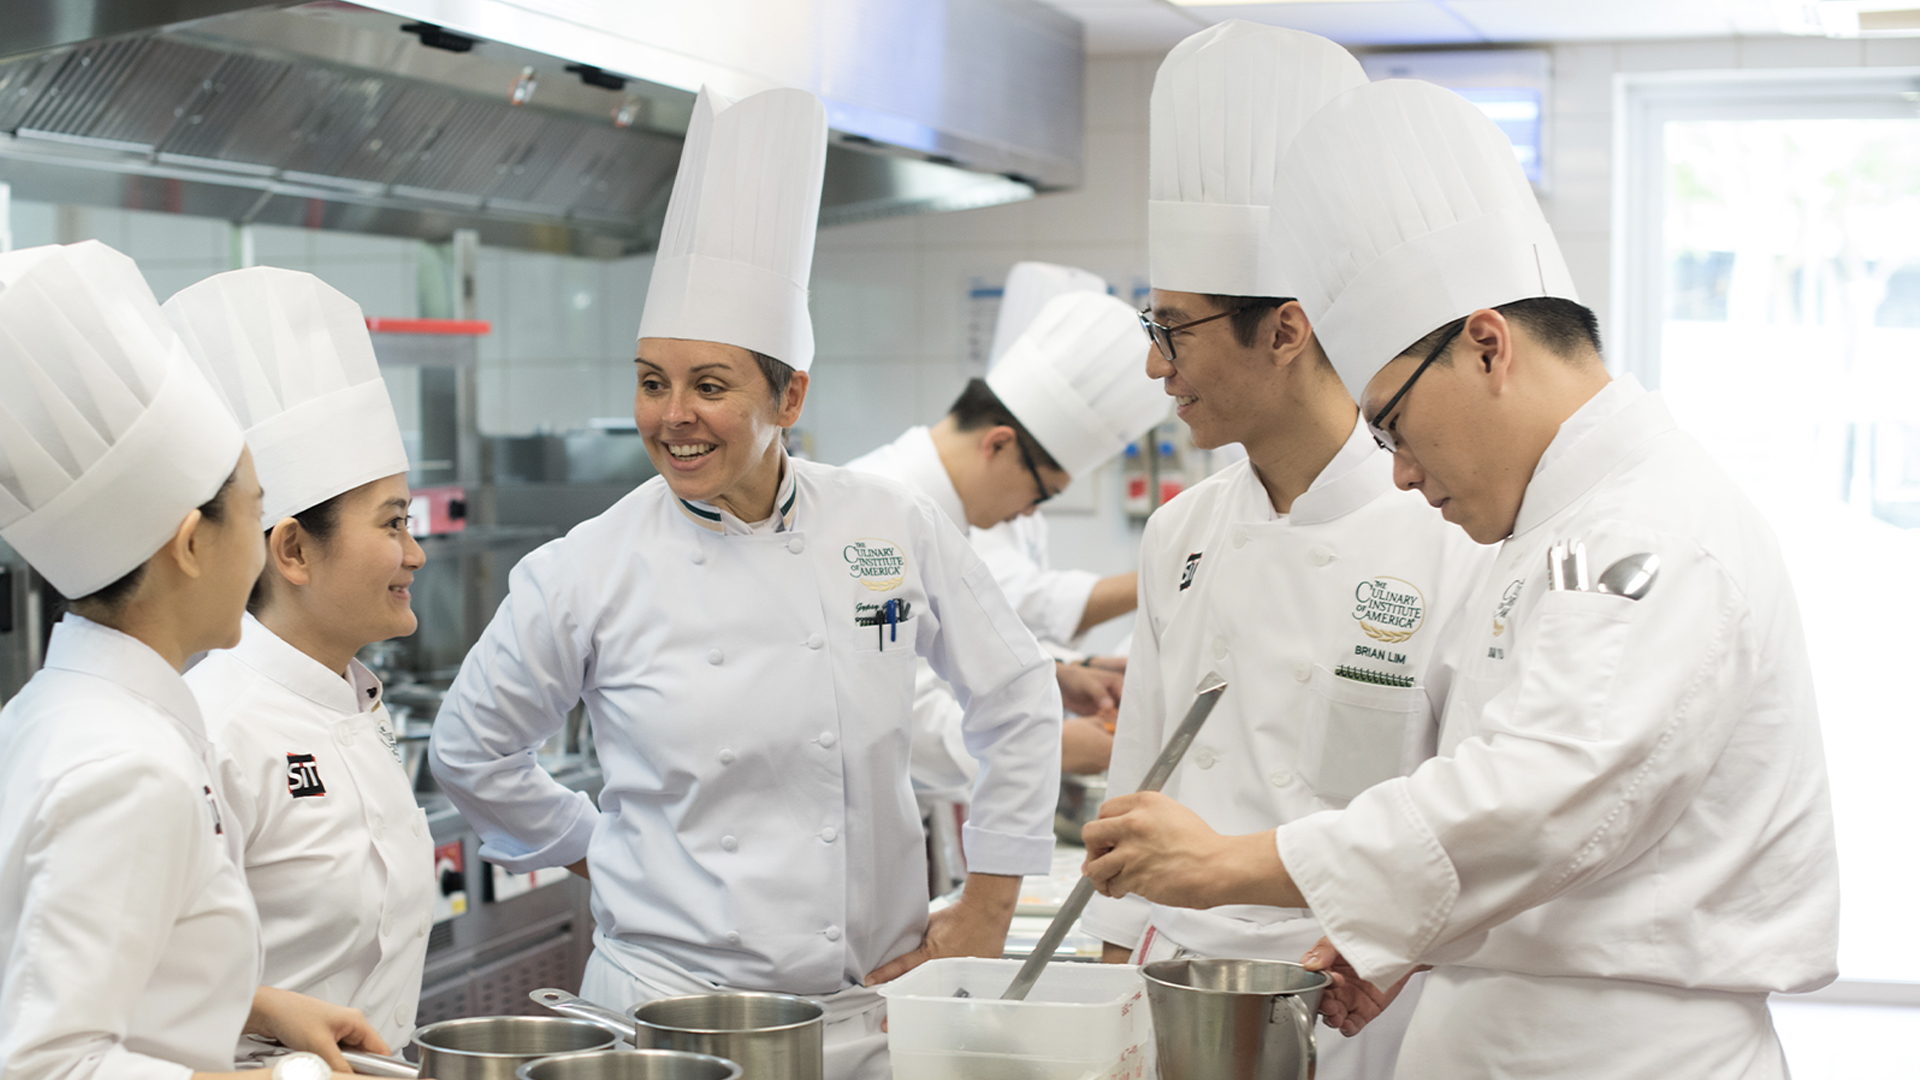 Food Business Management (Baking and Pastry Arts)